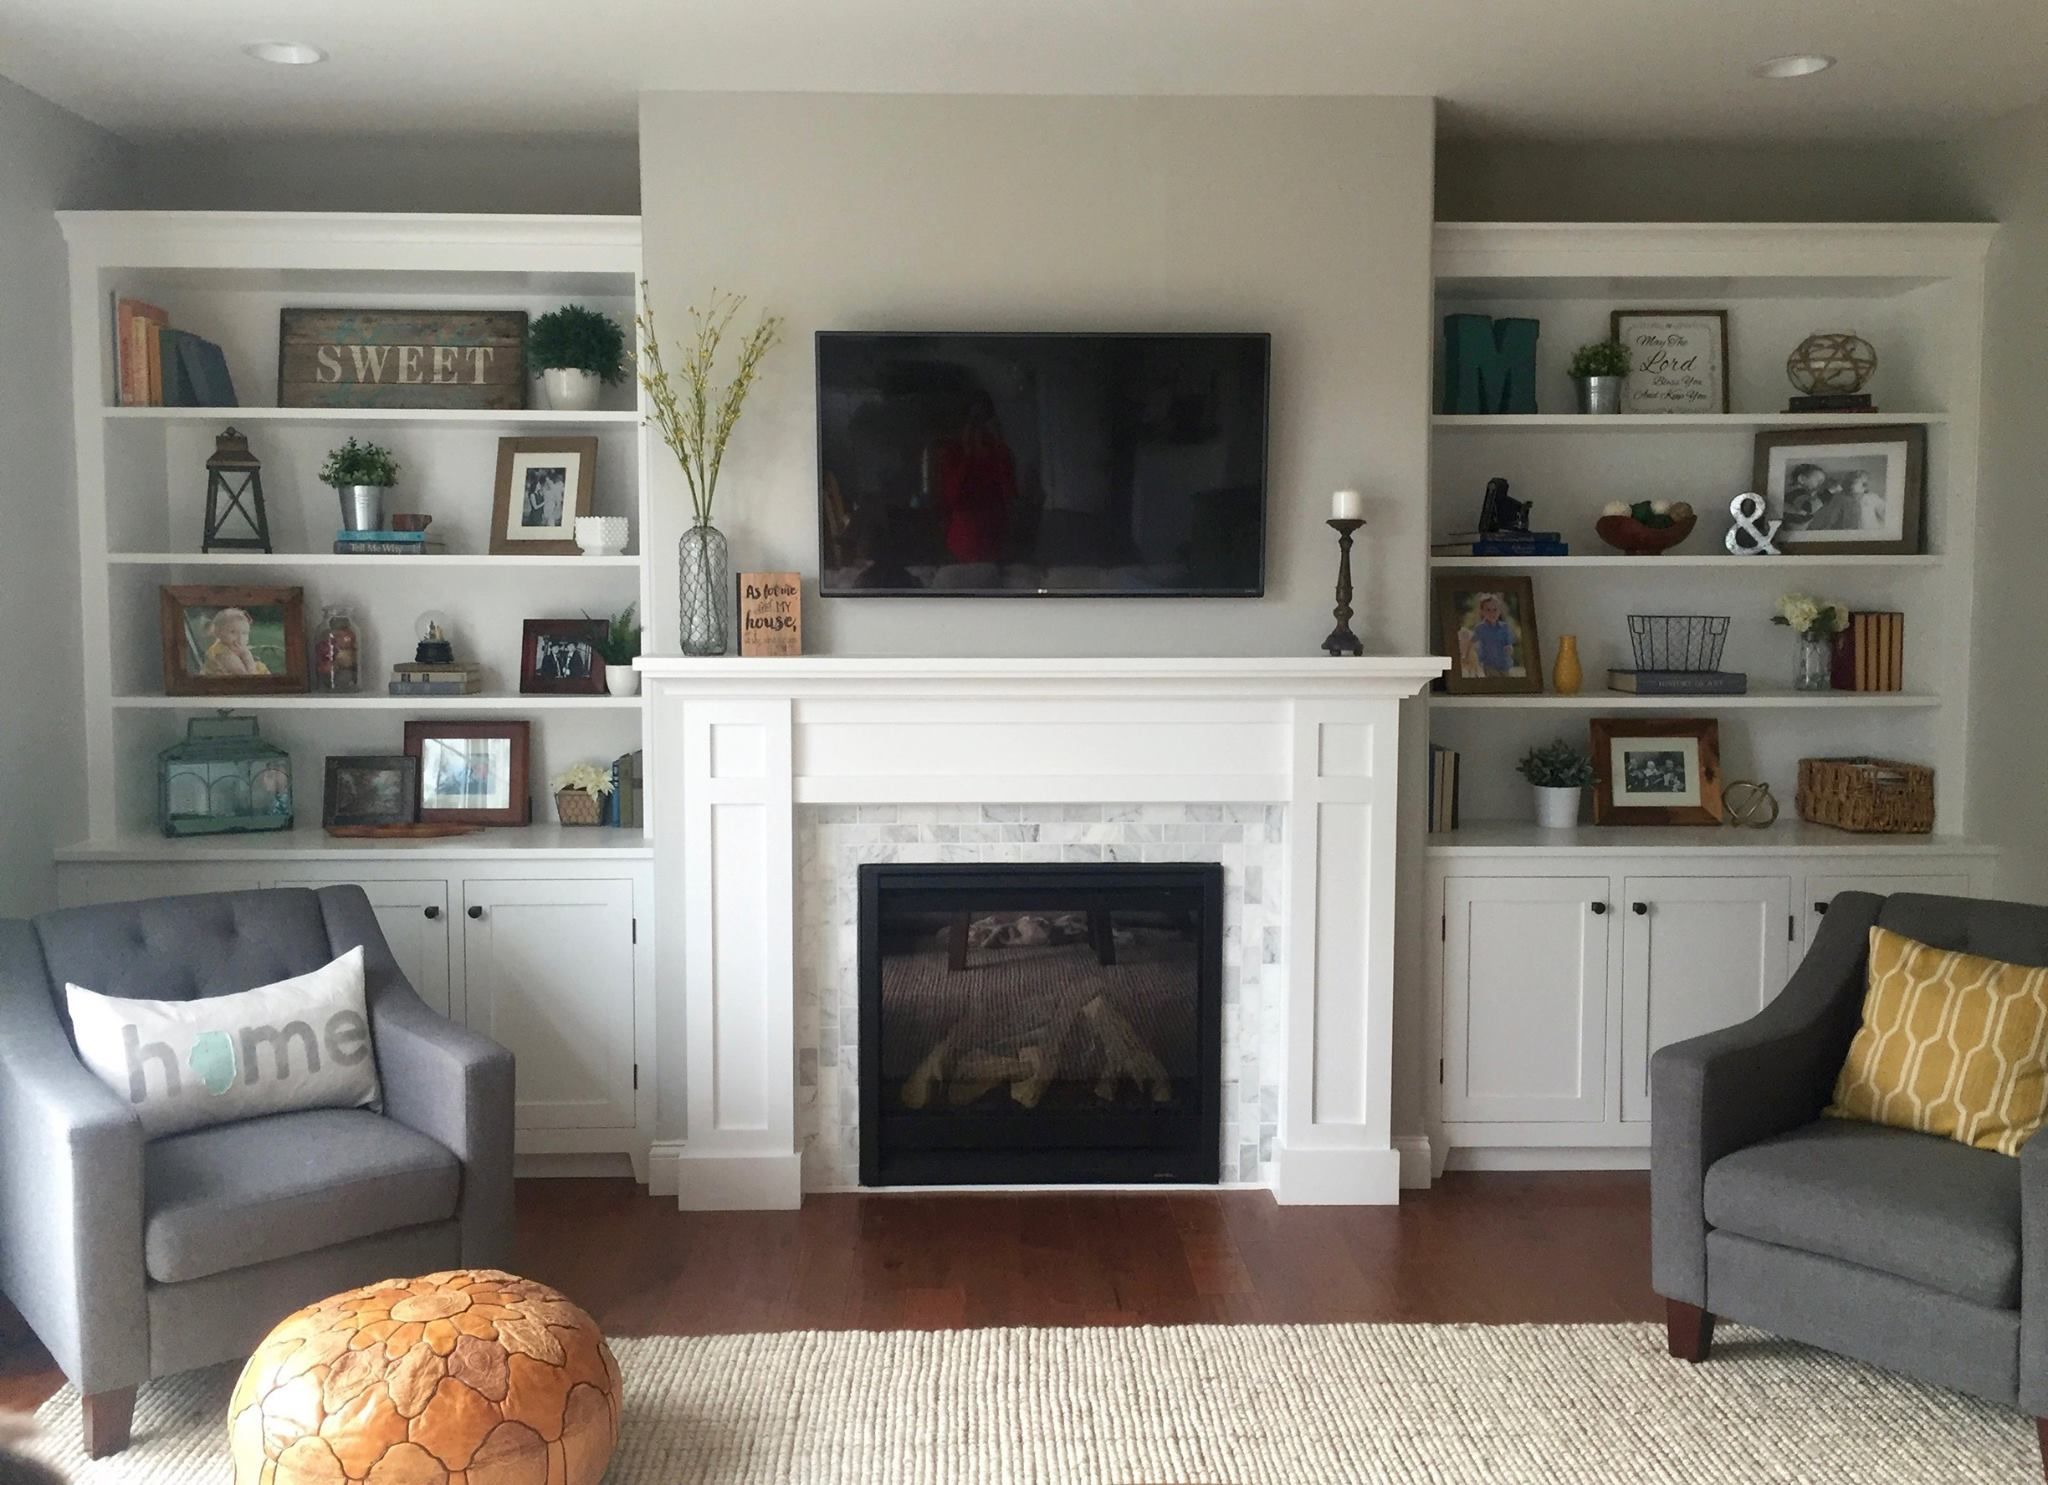 Instructions to build this fireplace mantel with built-in cabinets and bookshelves. Shaker style made out of solid poplar and